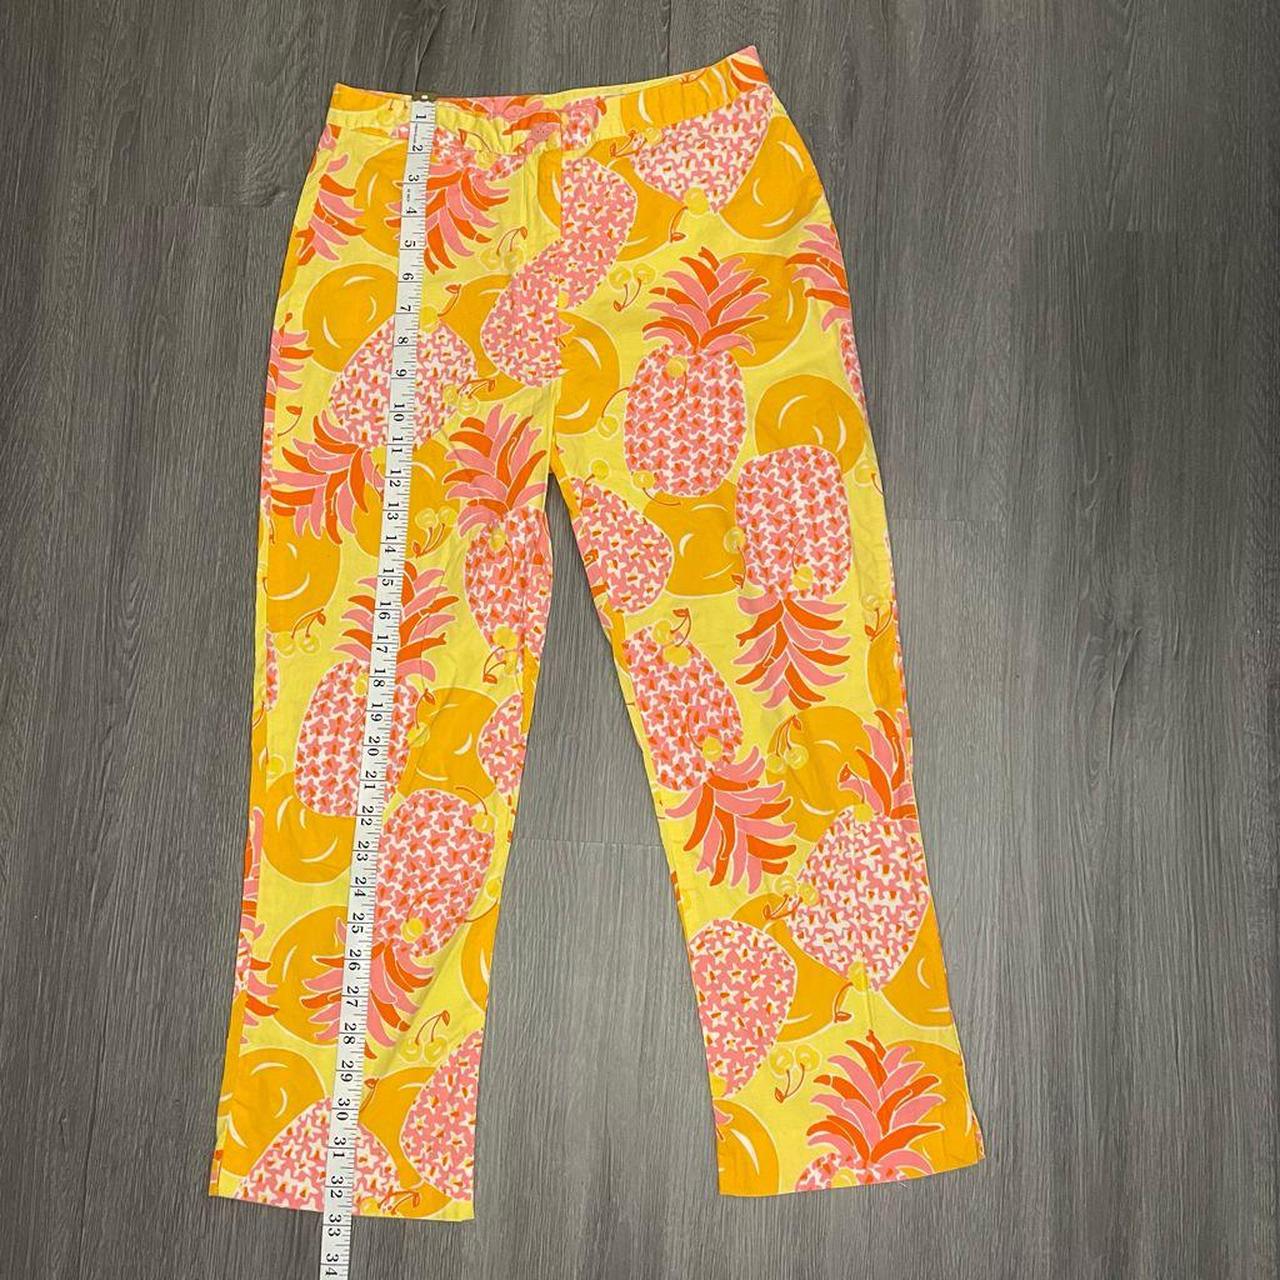 Lilly Pulitzer Women's Pink and Orange Trousers (4)